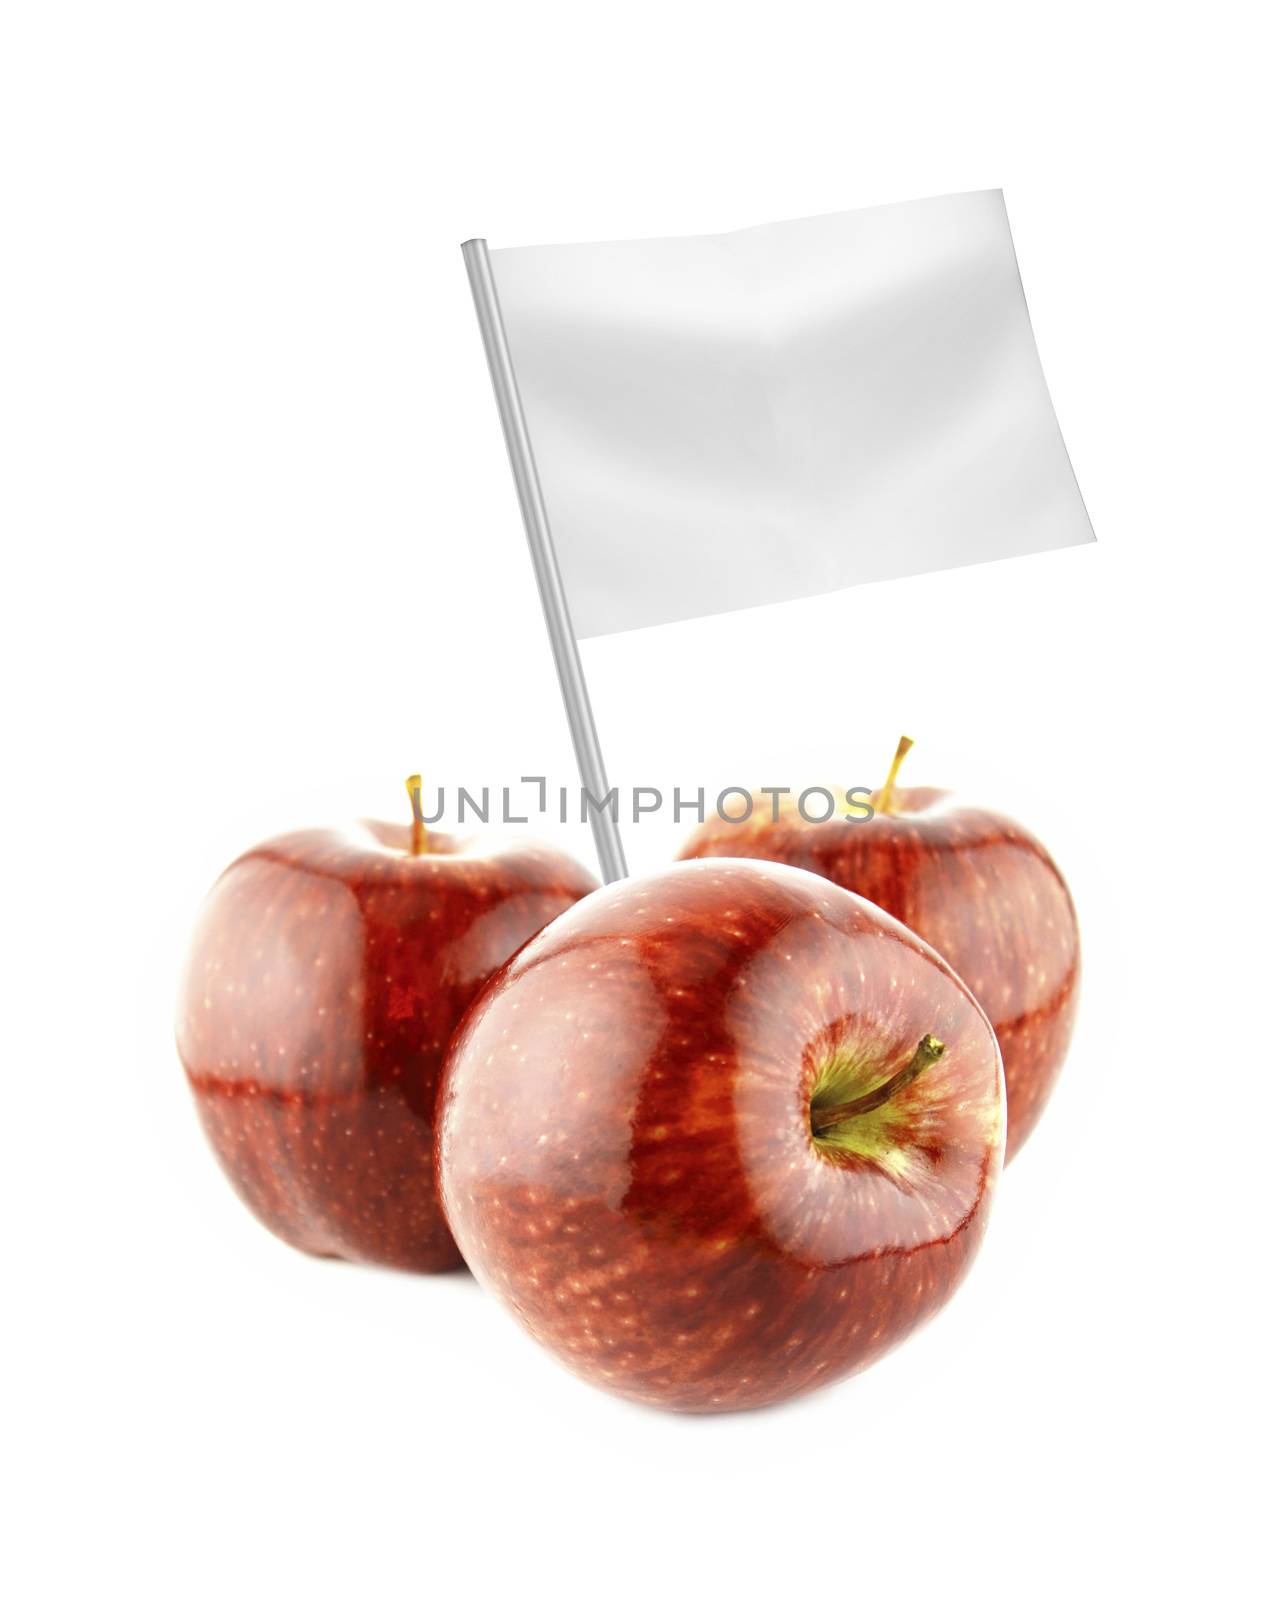 Healthy and organic food concept. Fresh red apples with flag showing the benefits or the price of fruits.